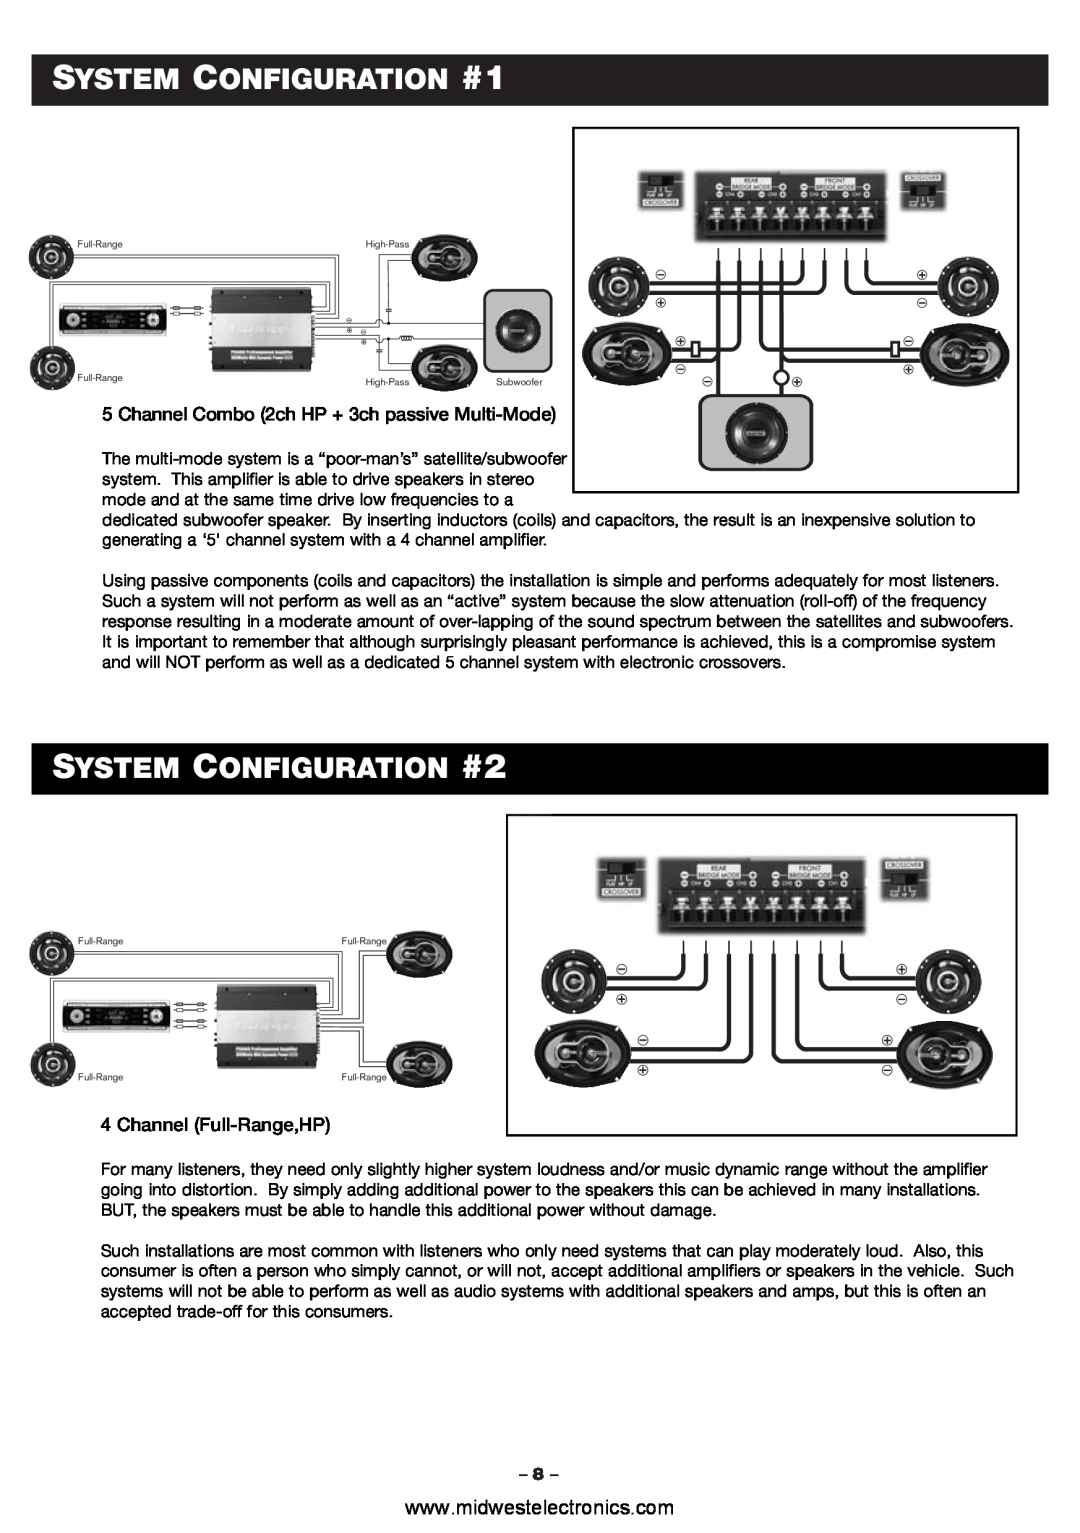 Blaupunkt PCA460 manual SYSTEM CONFIGURATION #1, SYSTEM CONFIGURATION #2, Channel Combo 2ch HP + 3ch passive Multi-Mode 